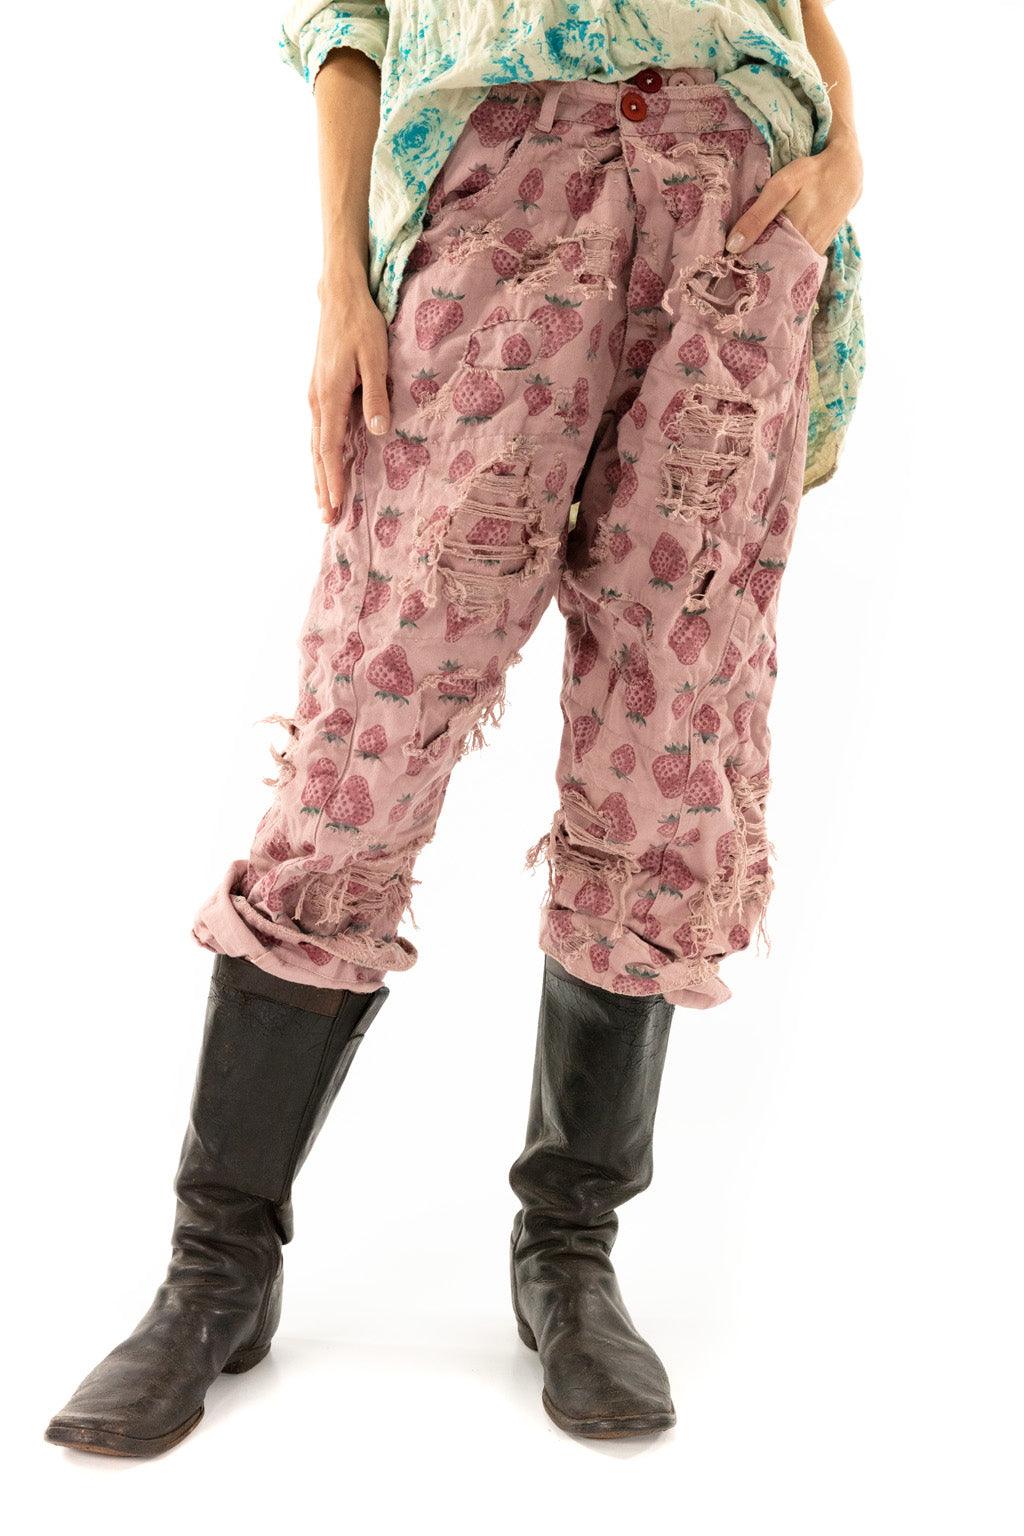 Strawberry Provision Trousers - Magnolia Pearl Clothing